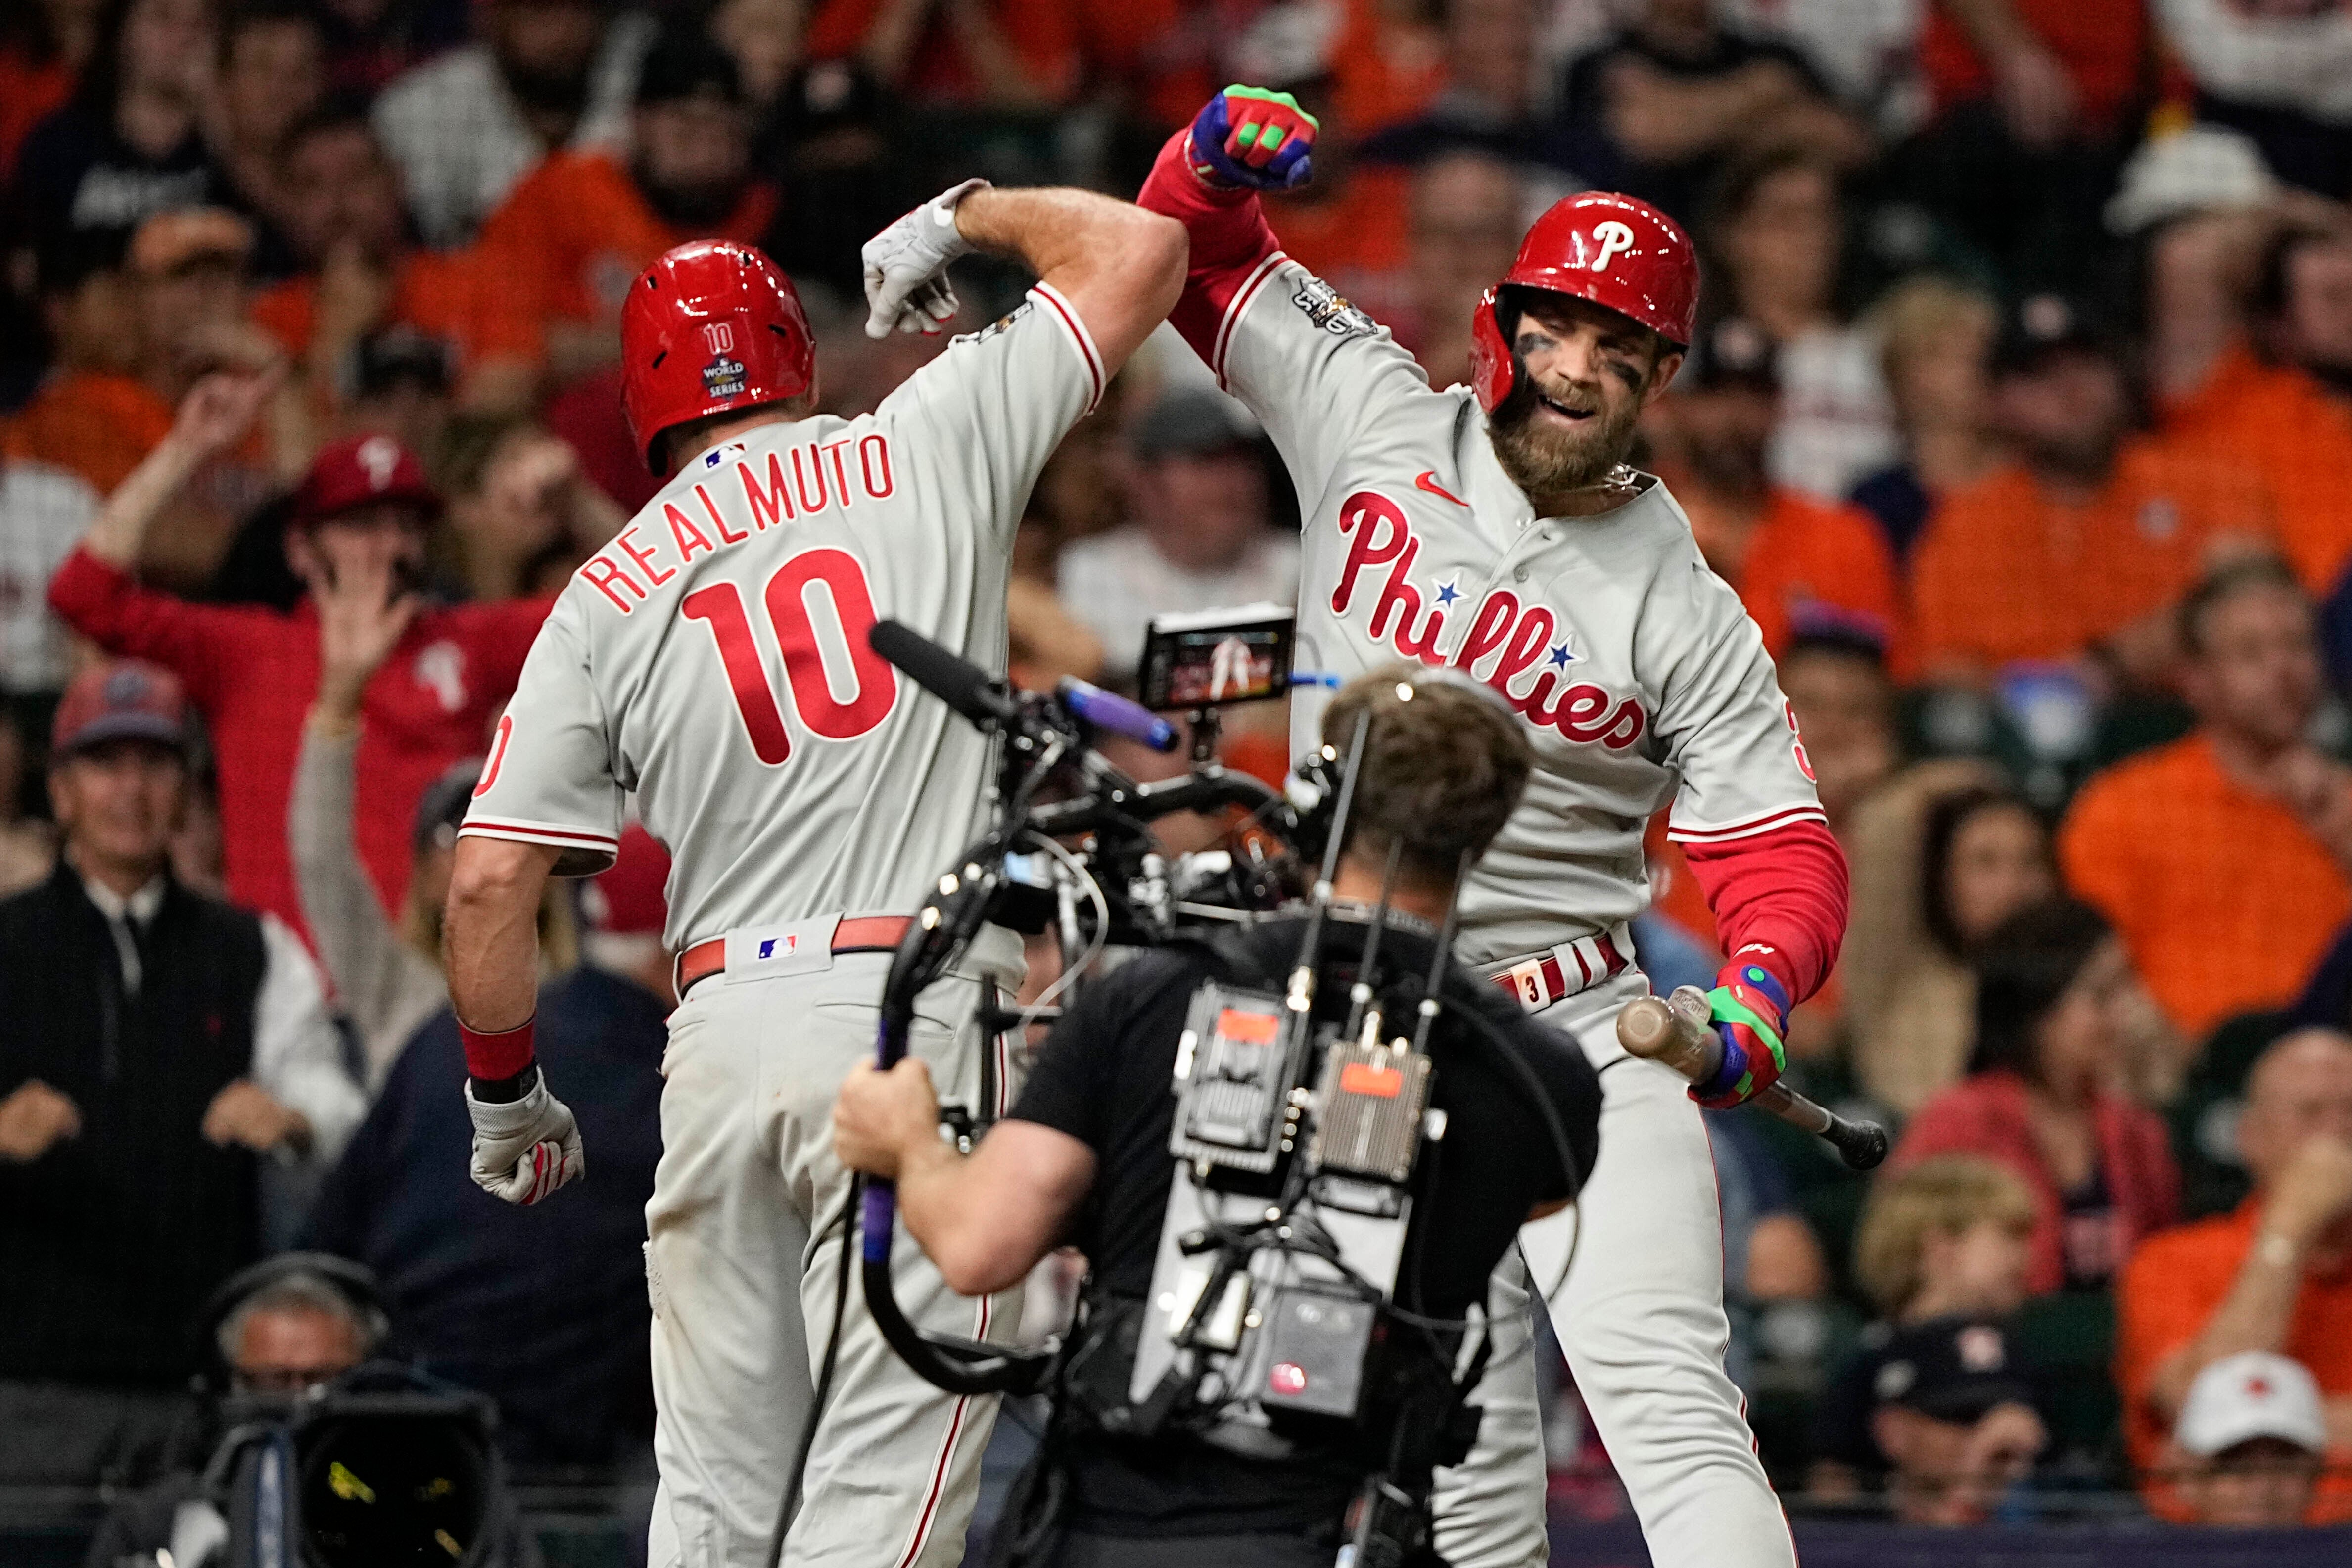 Phillies World Series opener most viewed on TV since 2019 - WHYY